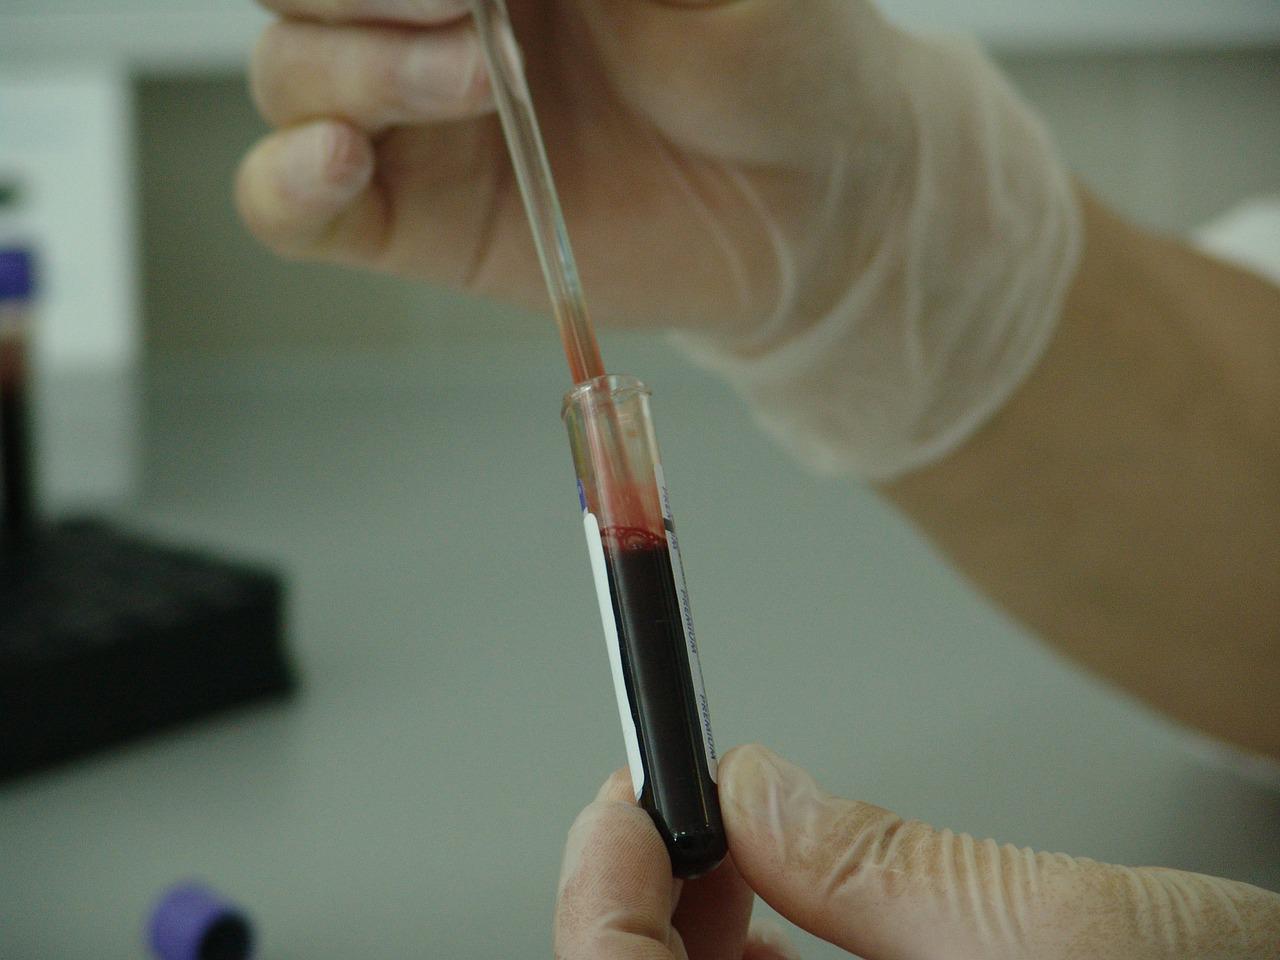 blood in a vial